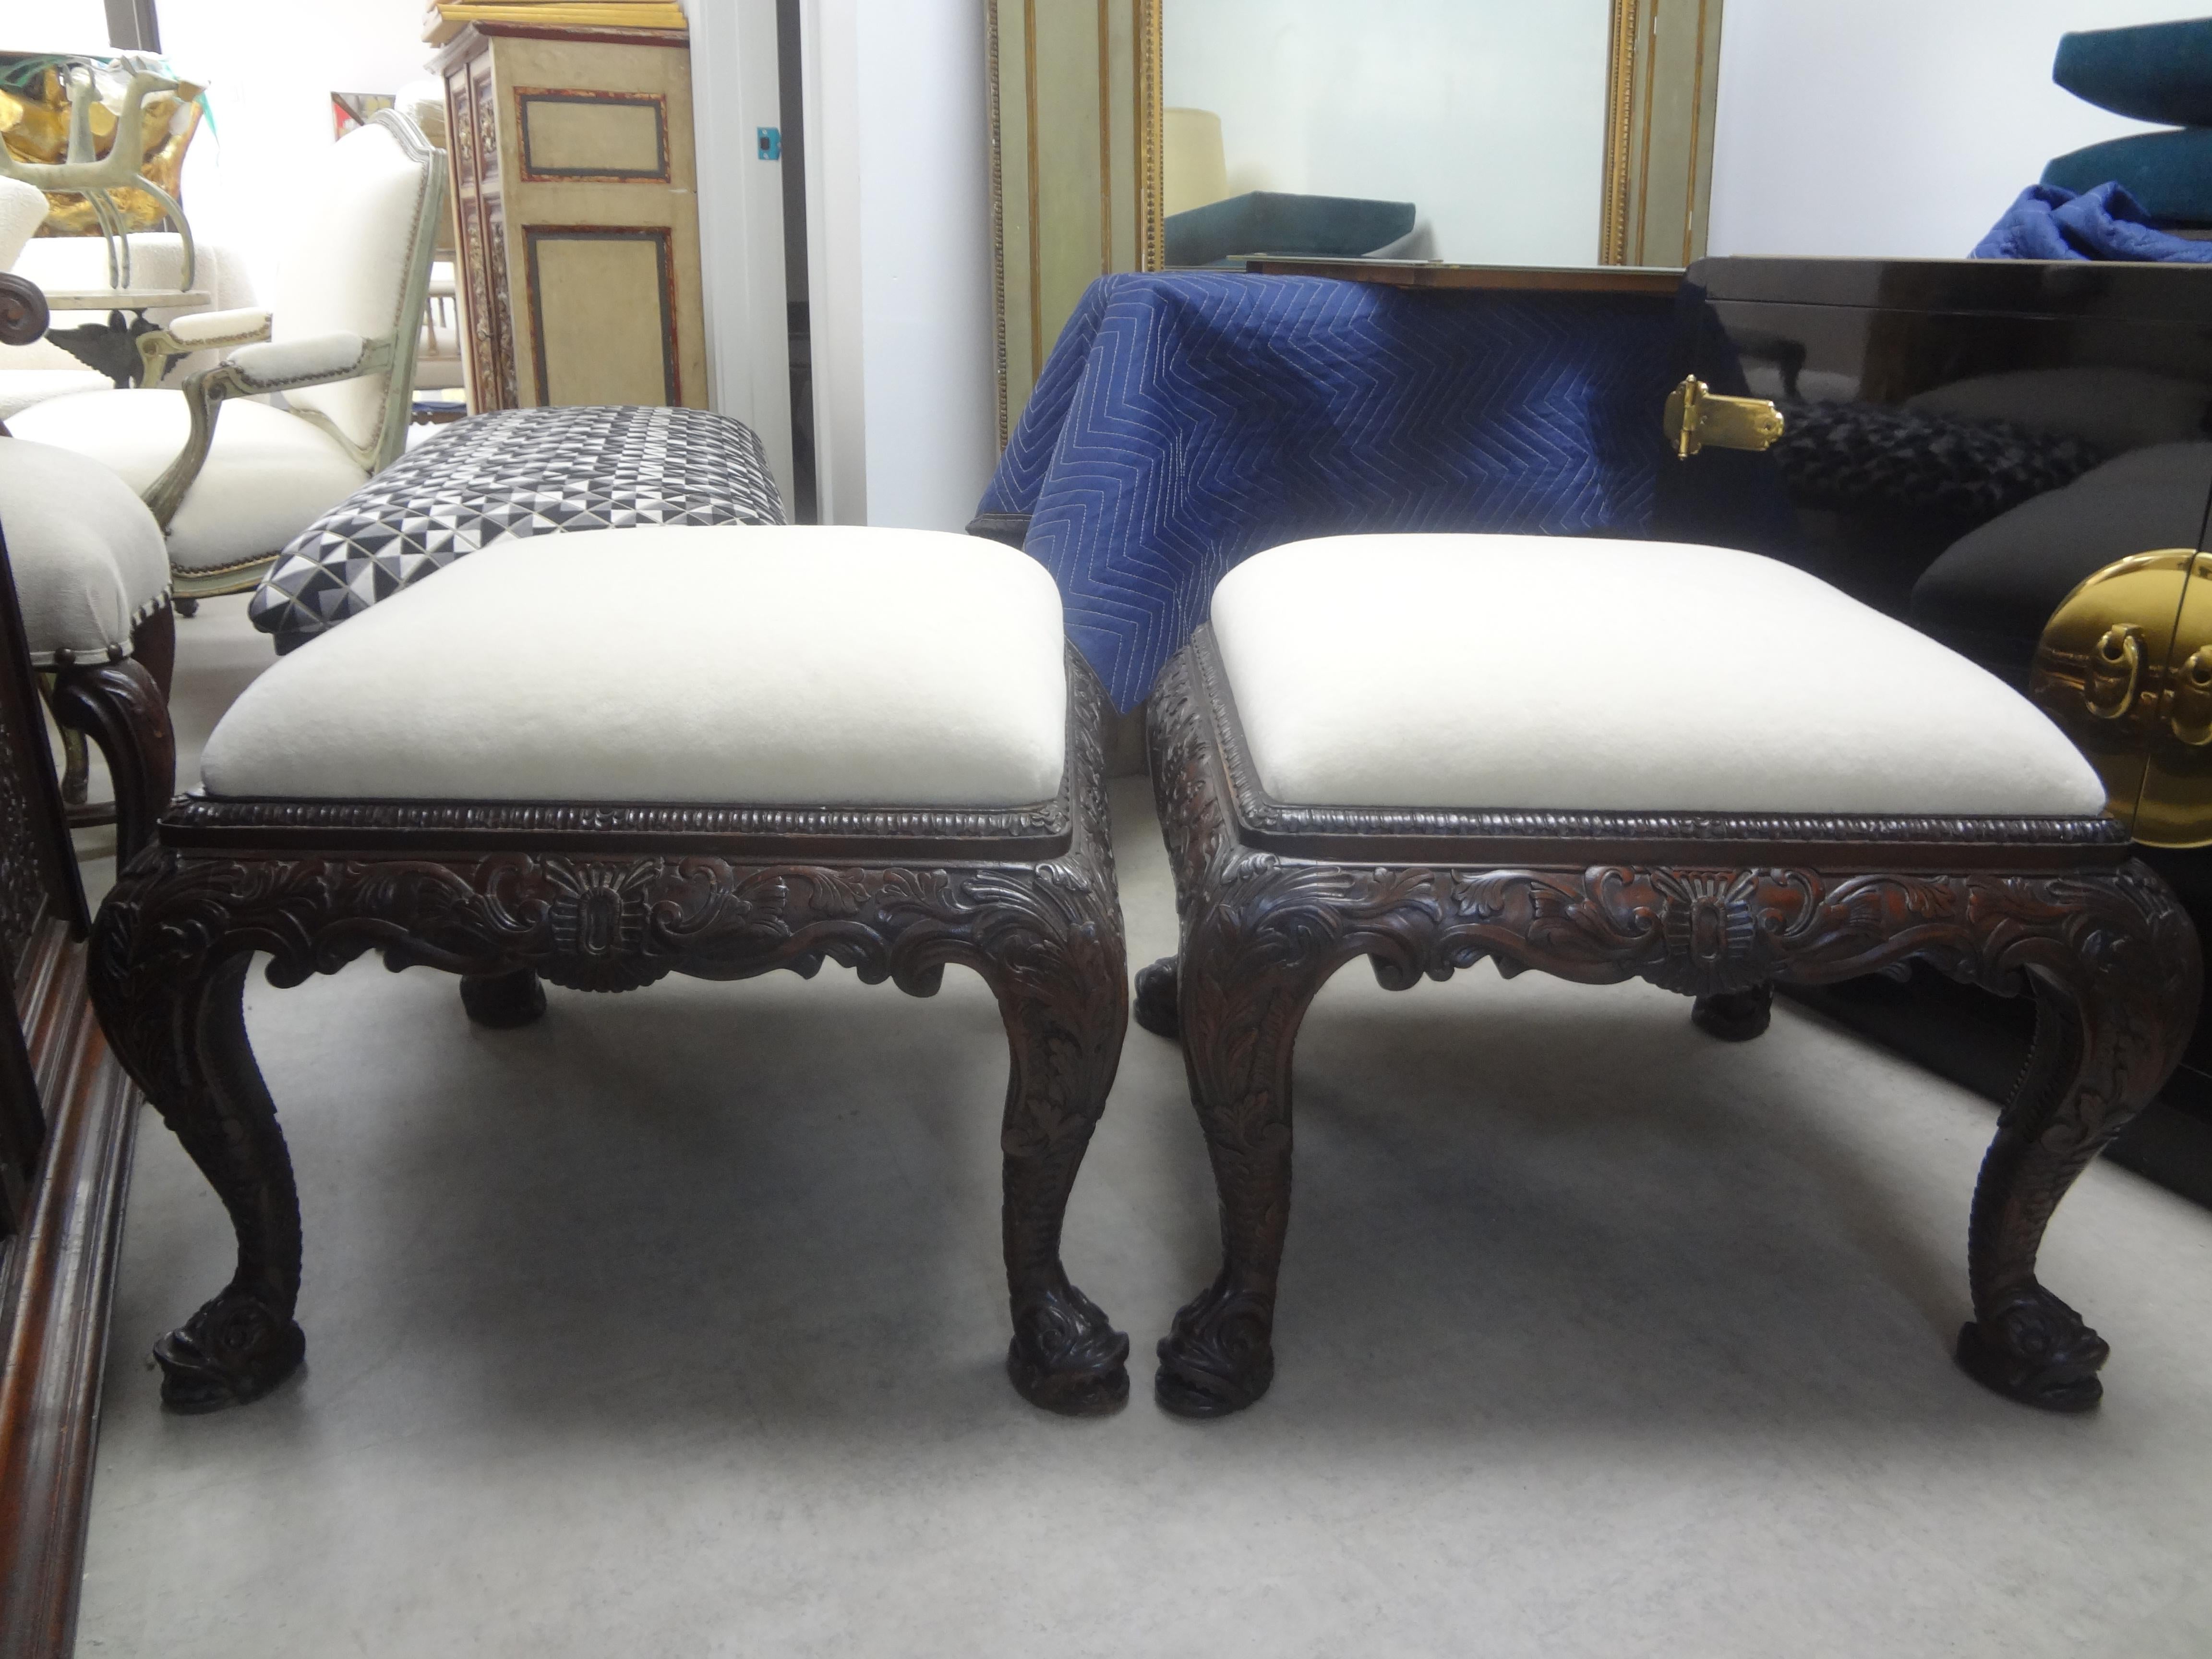 Pair of Large Scale Antique English Regency Style Ottomans with Dolphin Feet For Sale 8